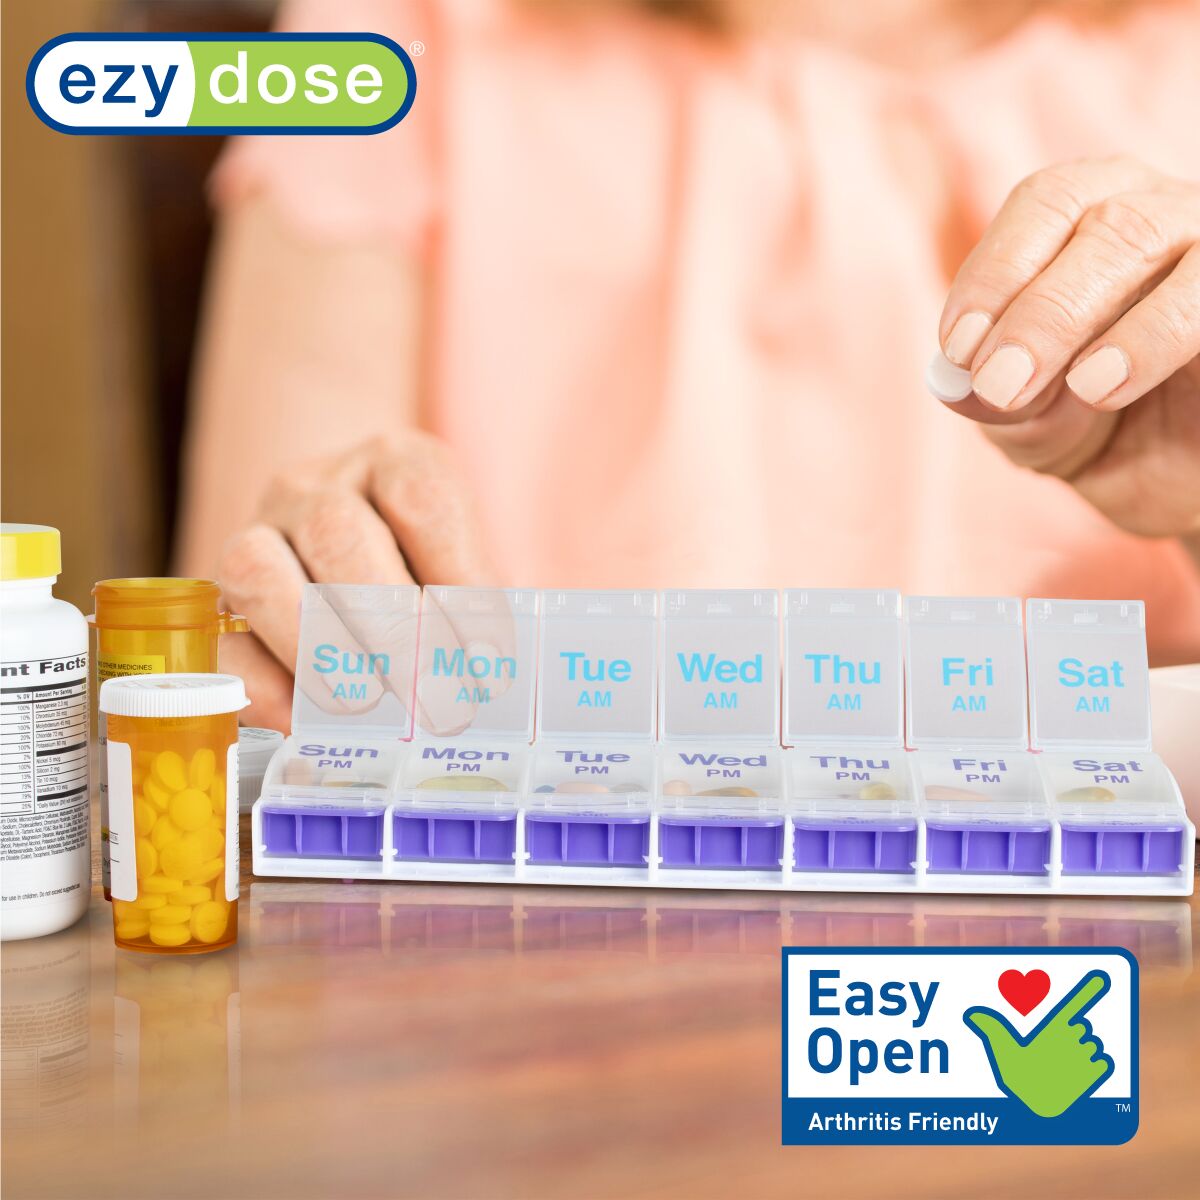 Ezy Dose Push button pill organizers are endorsed by the Arthritis Foundation